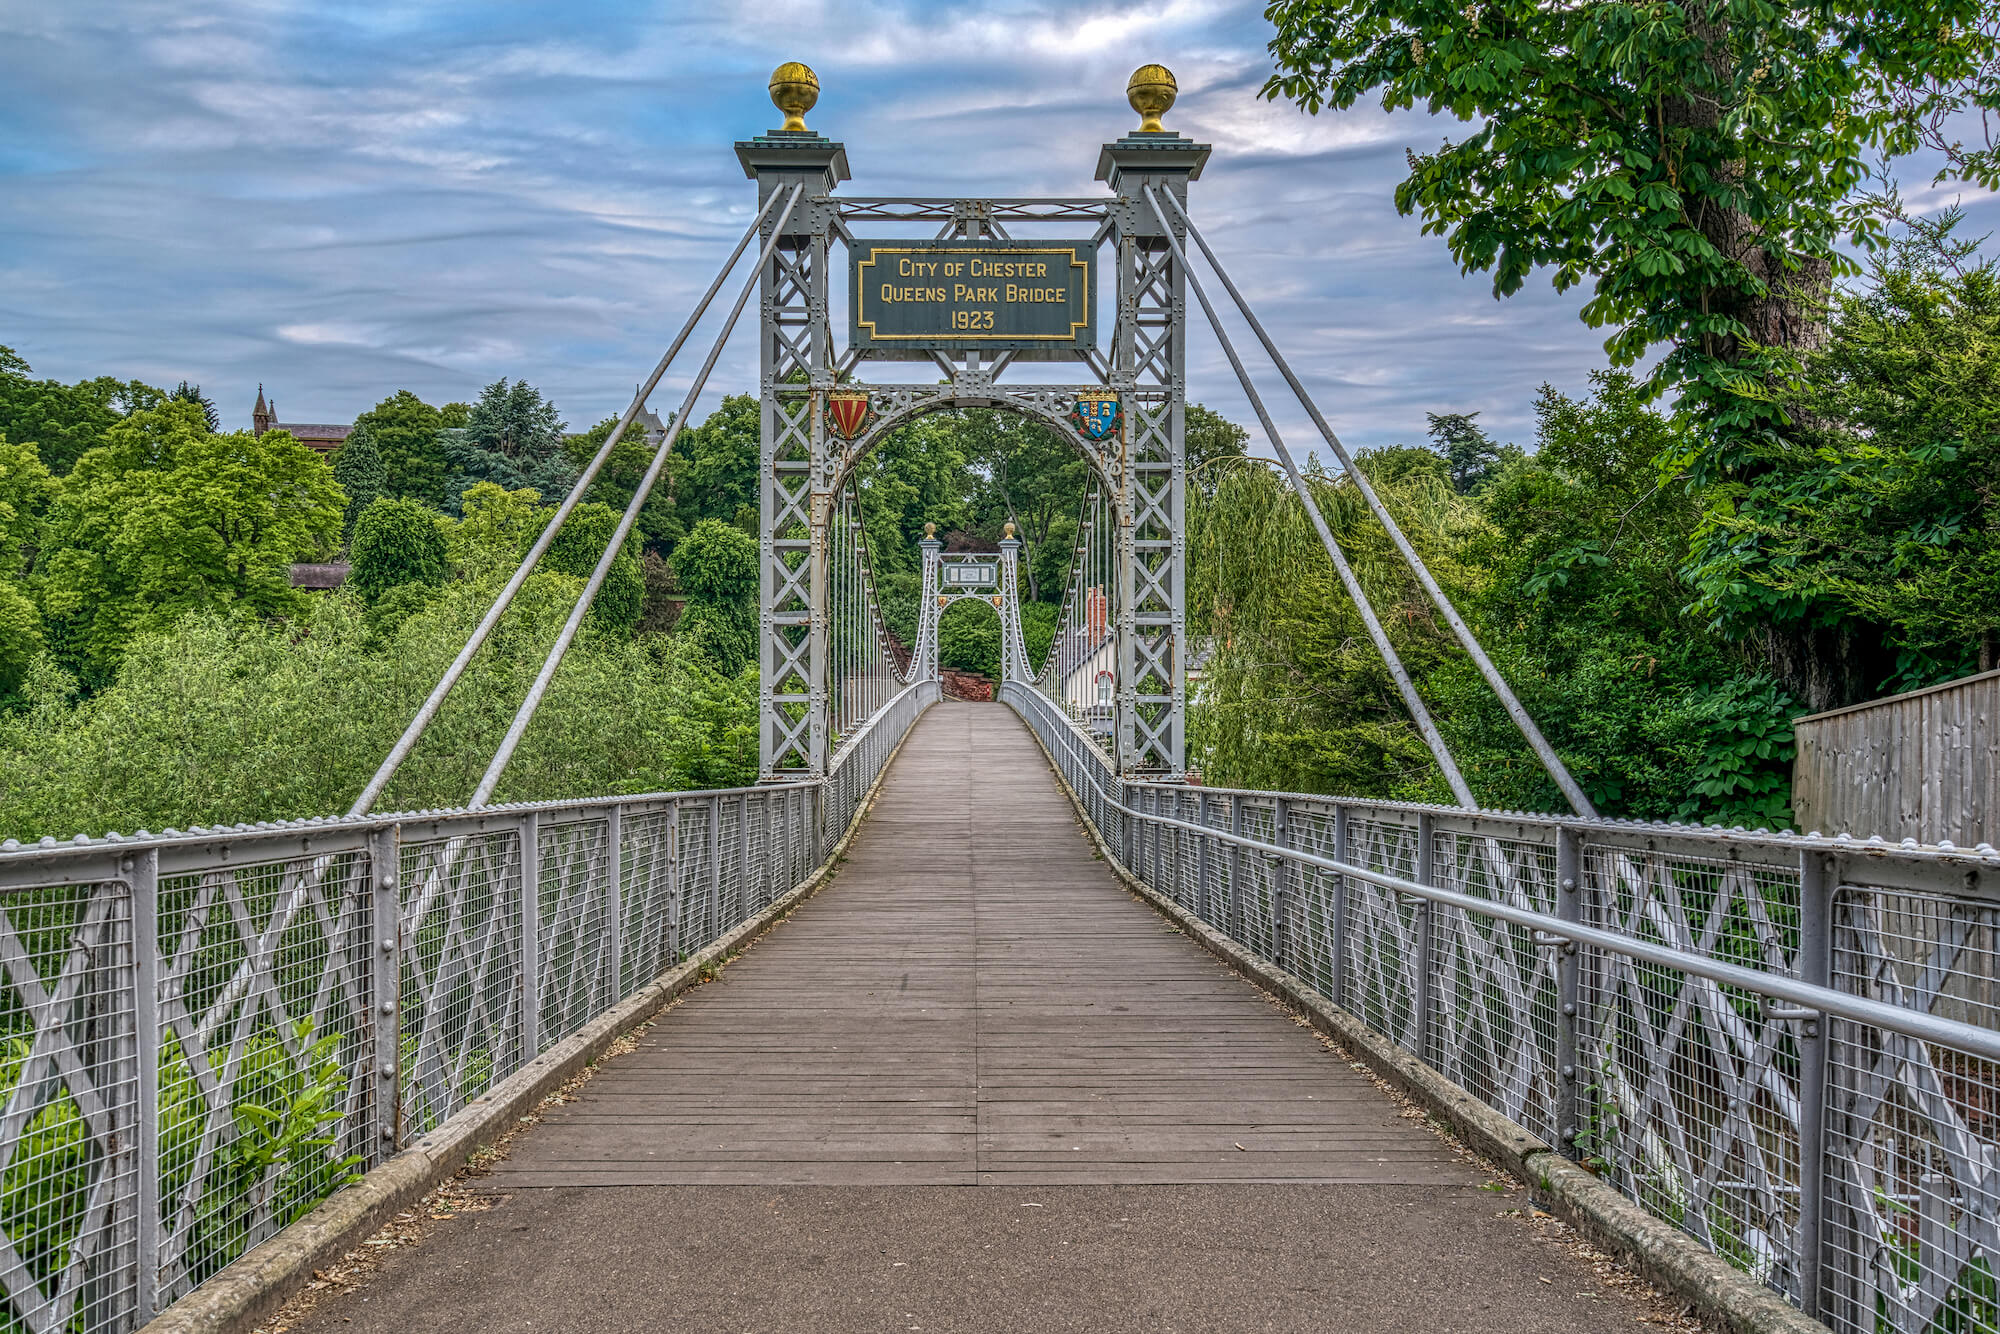 An image picturing an iconic bridge crossing over the River Dee in the heart of the historic city of Chester taken by local independant Chester and Cheshire property experts, Currans Homes Estate Agents.